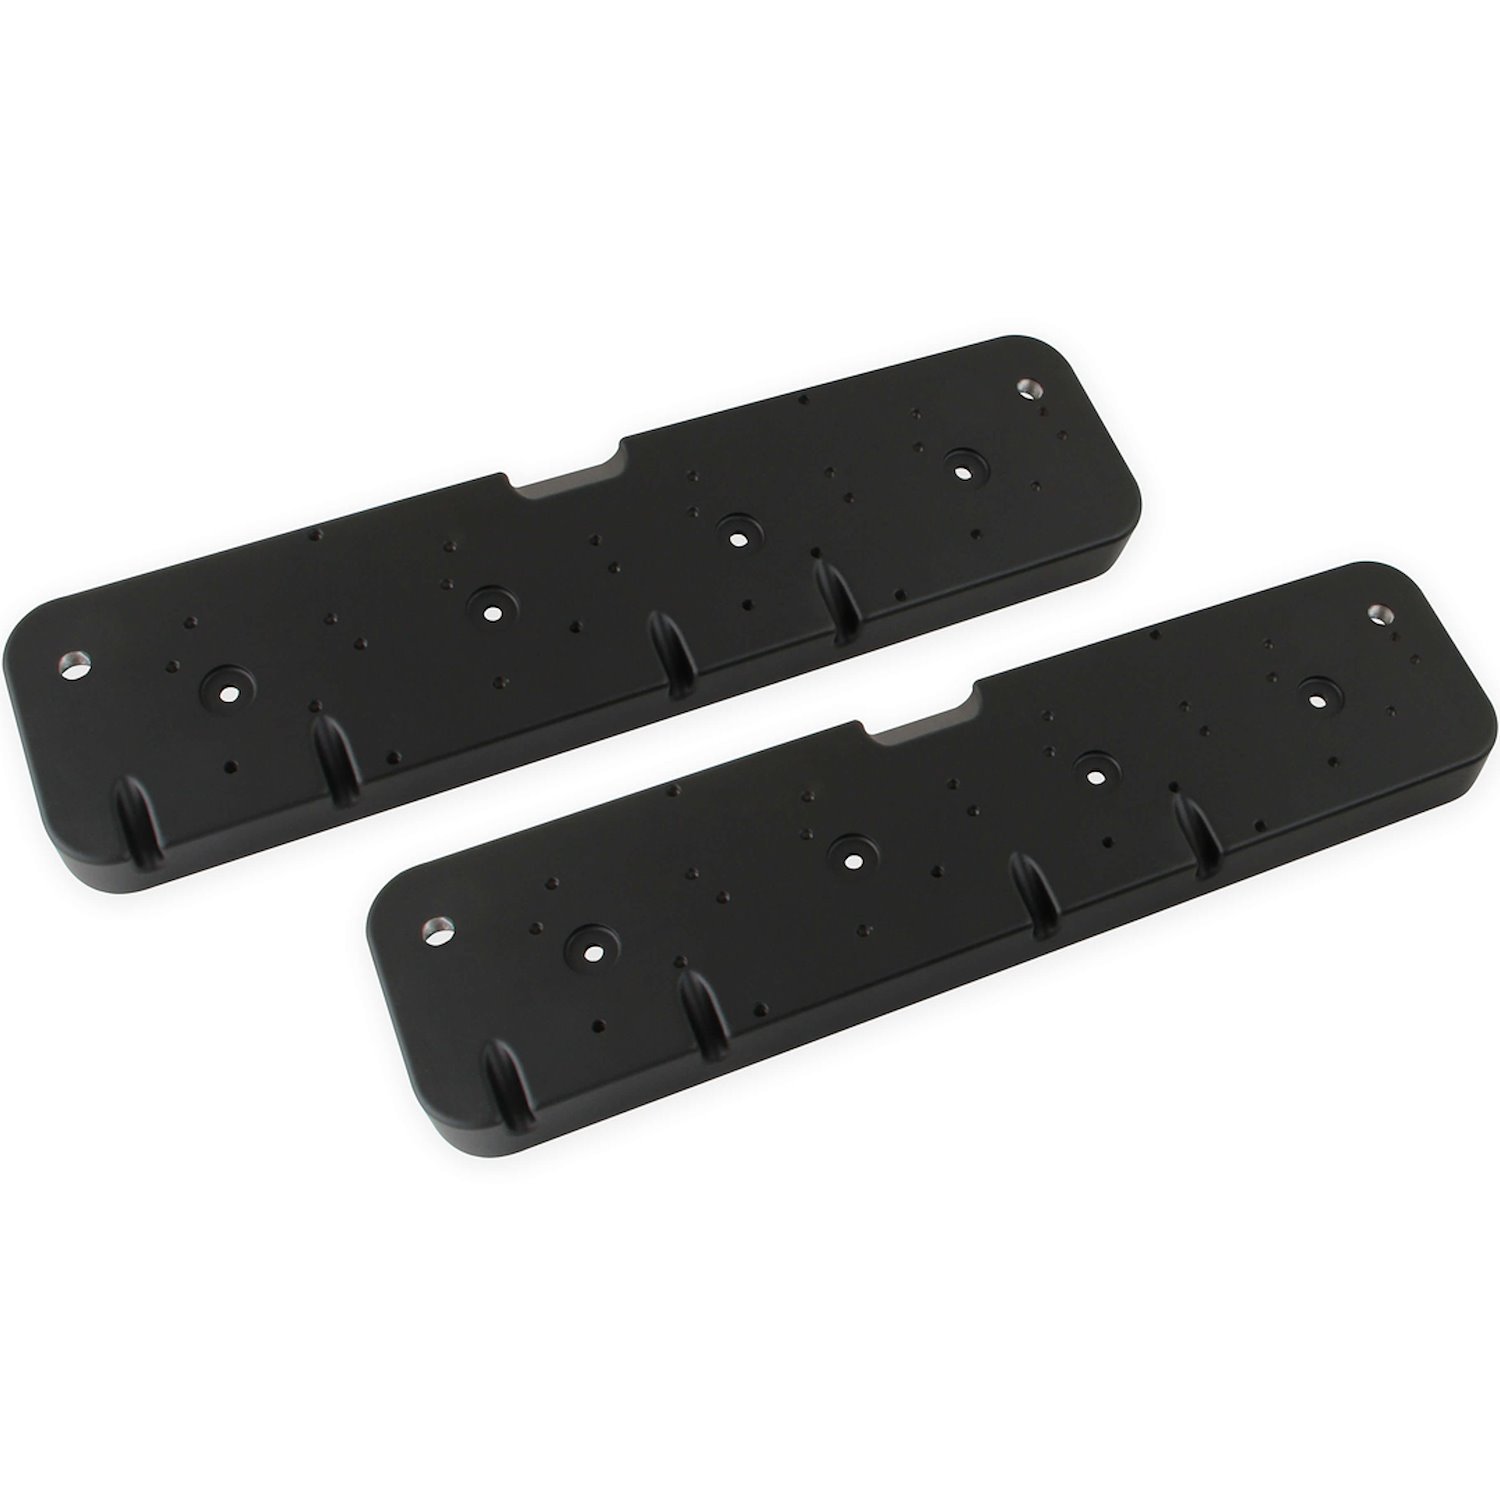 Valve Cover Adapter Plates for GM LS Engines